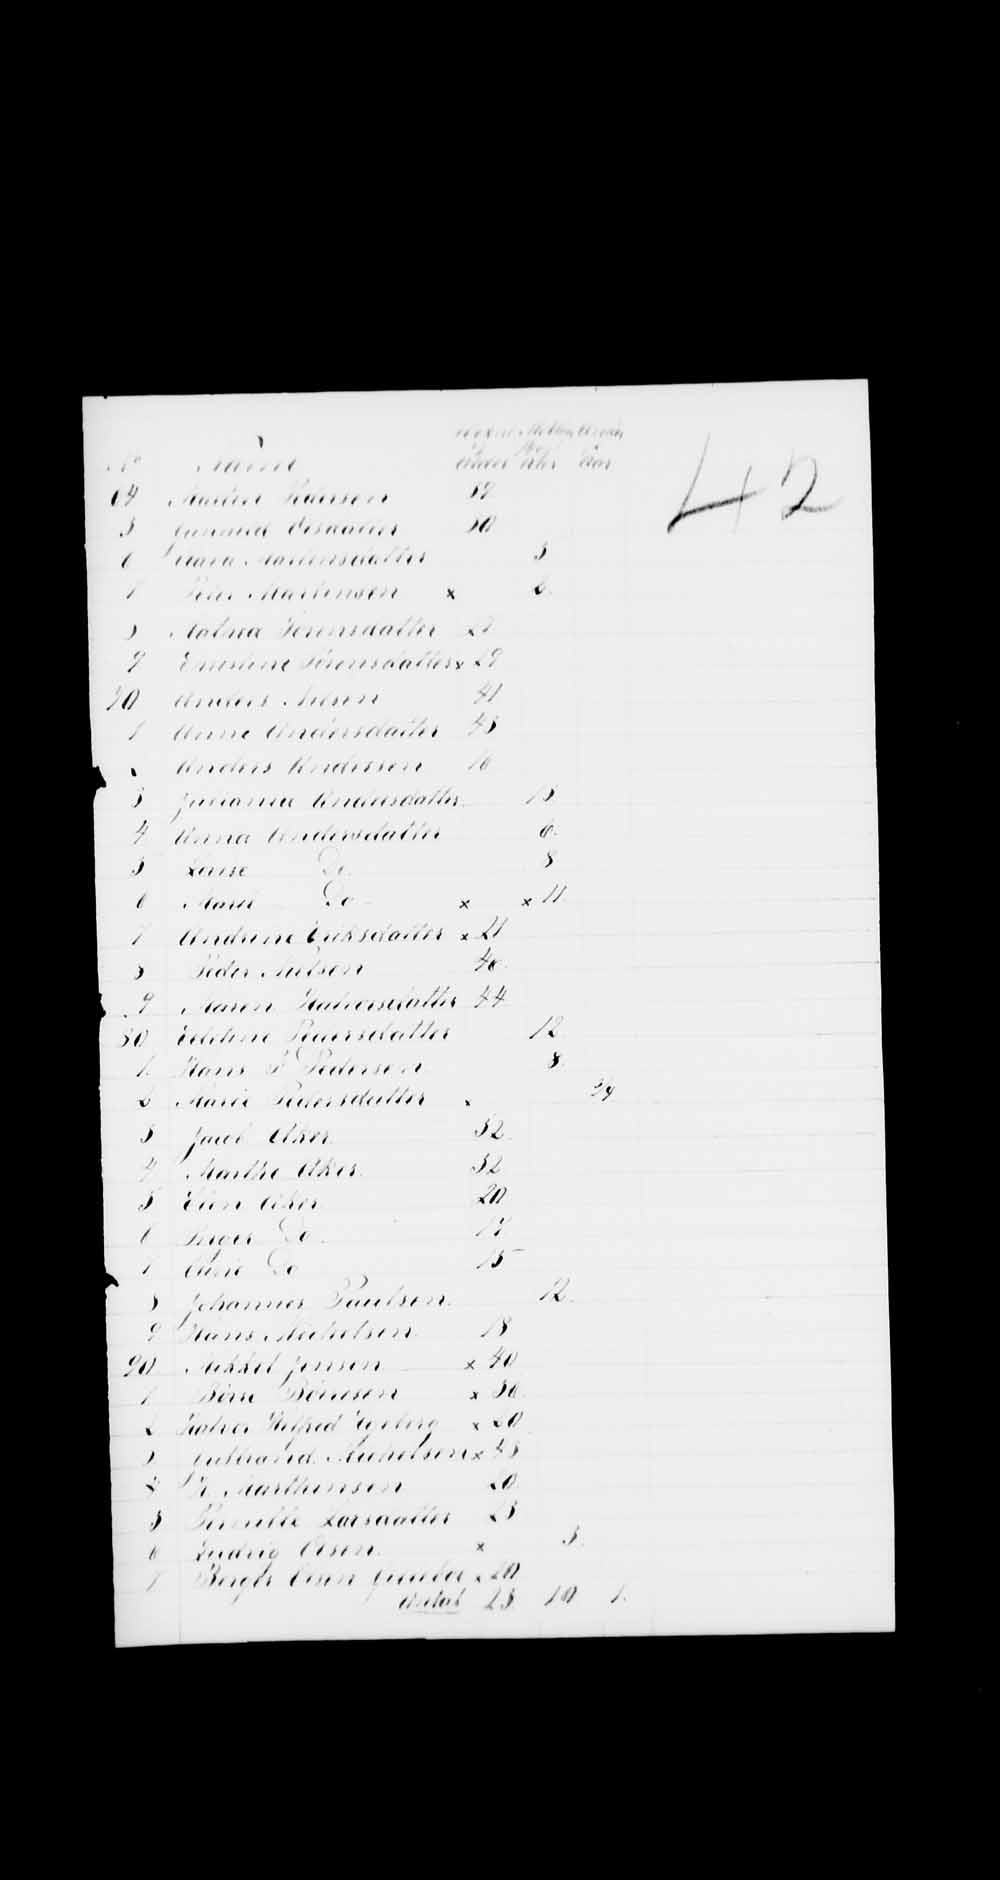 Digitized page of Passenger Lists for Image No.: e003530331